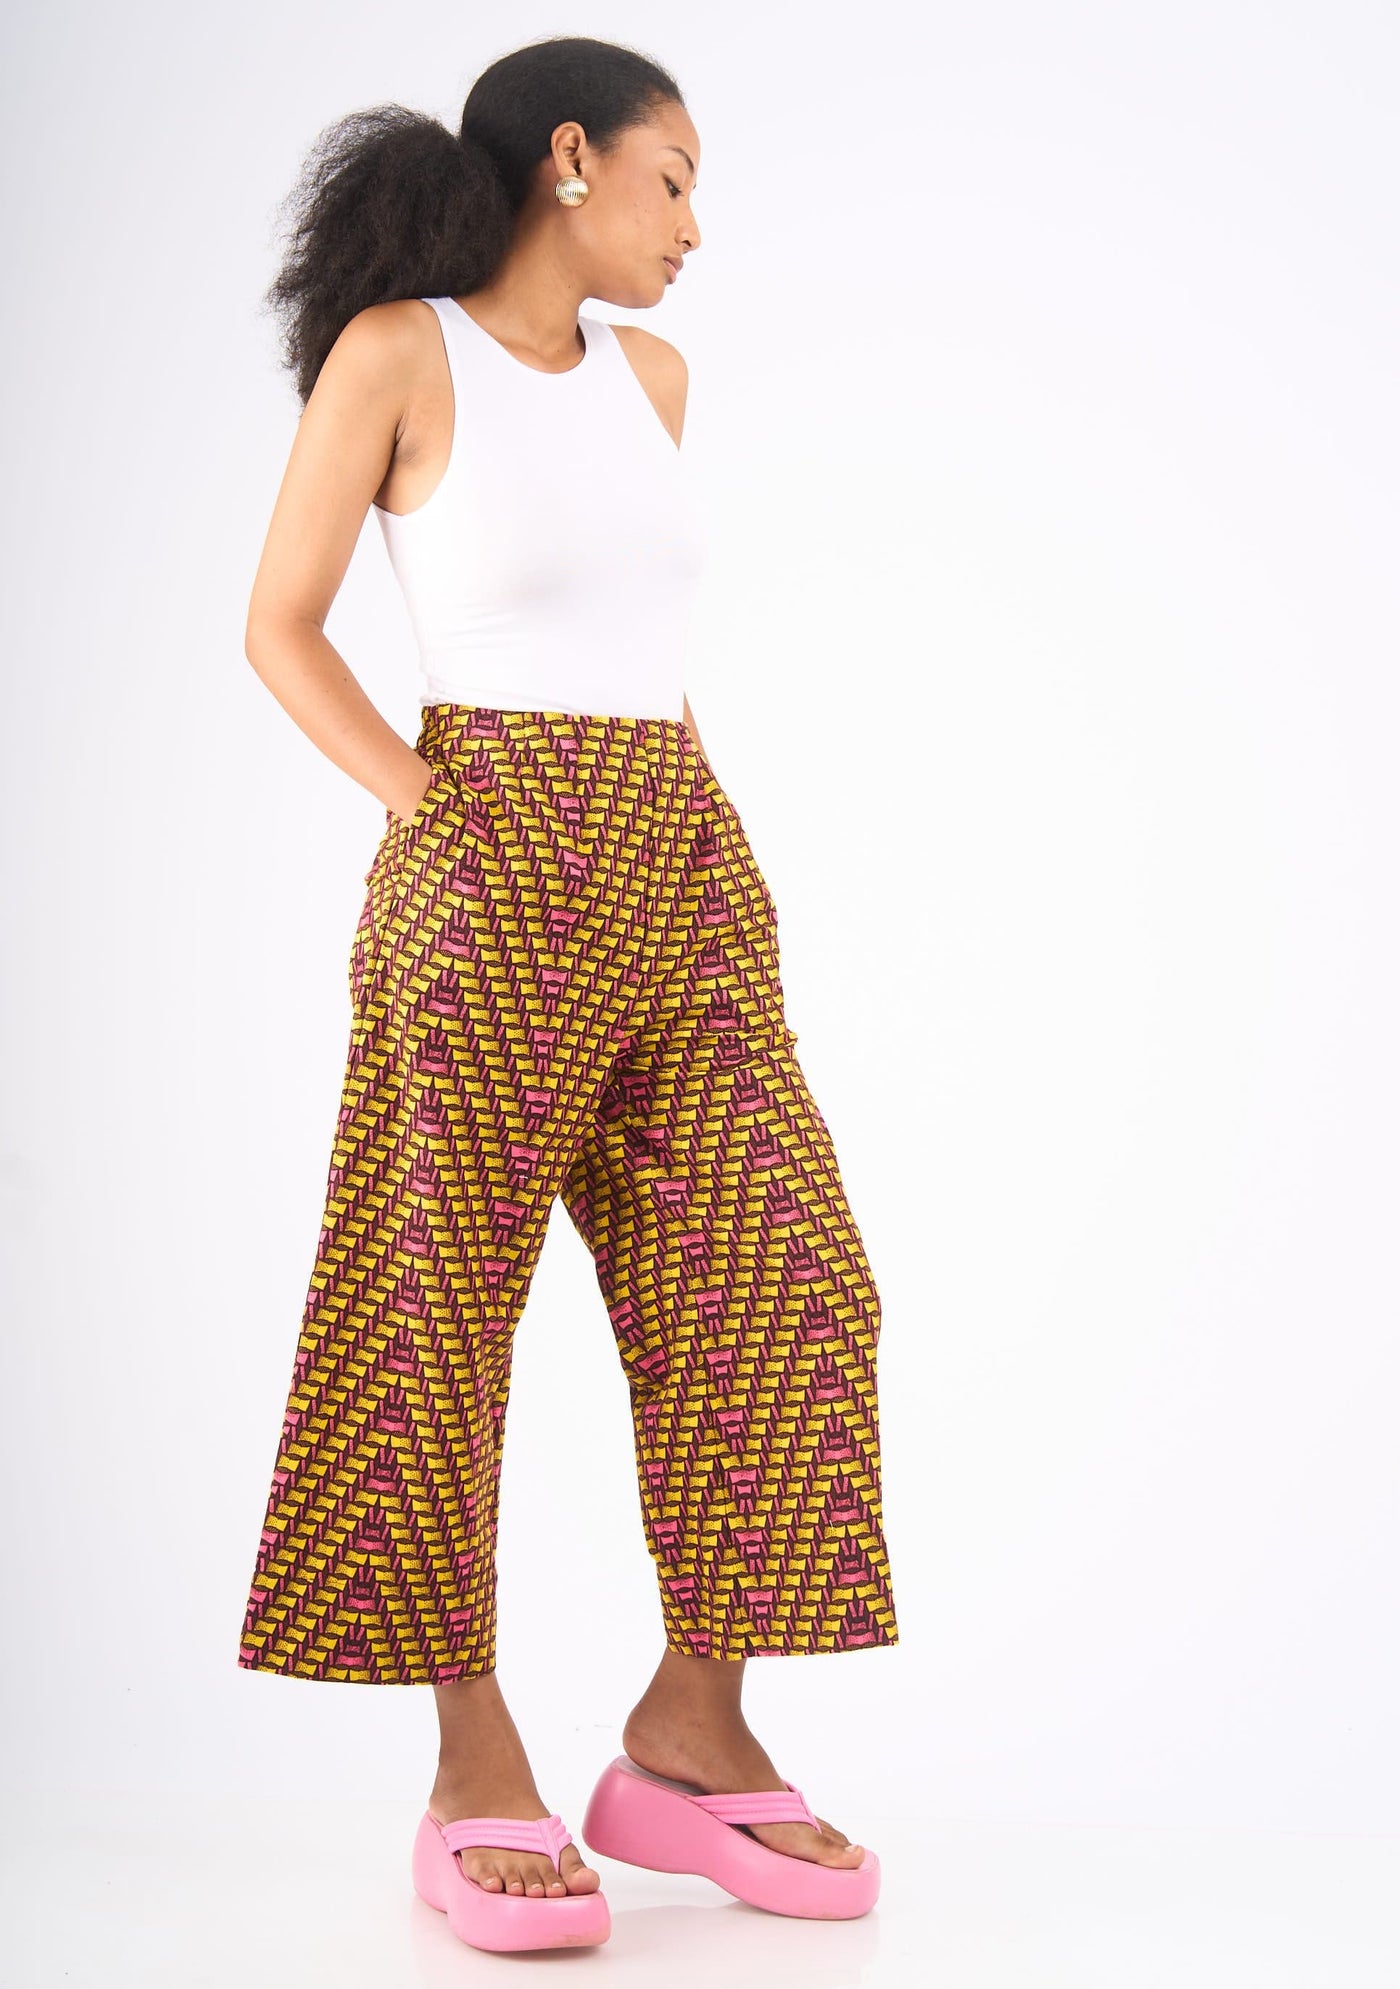 Women's Pants/ Palazzo Pants and Ladies Skirts in Ghana – Dimes&Co